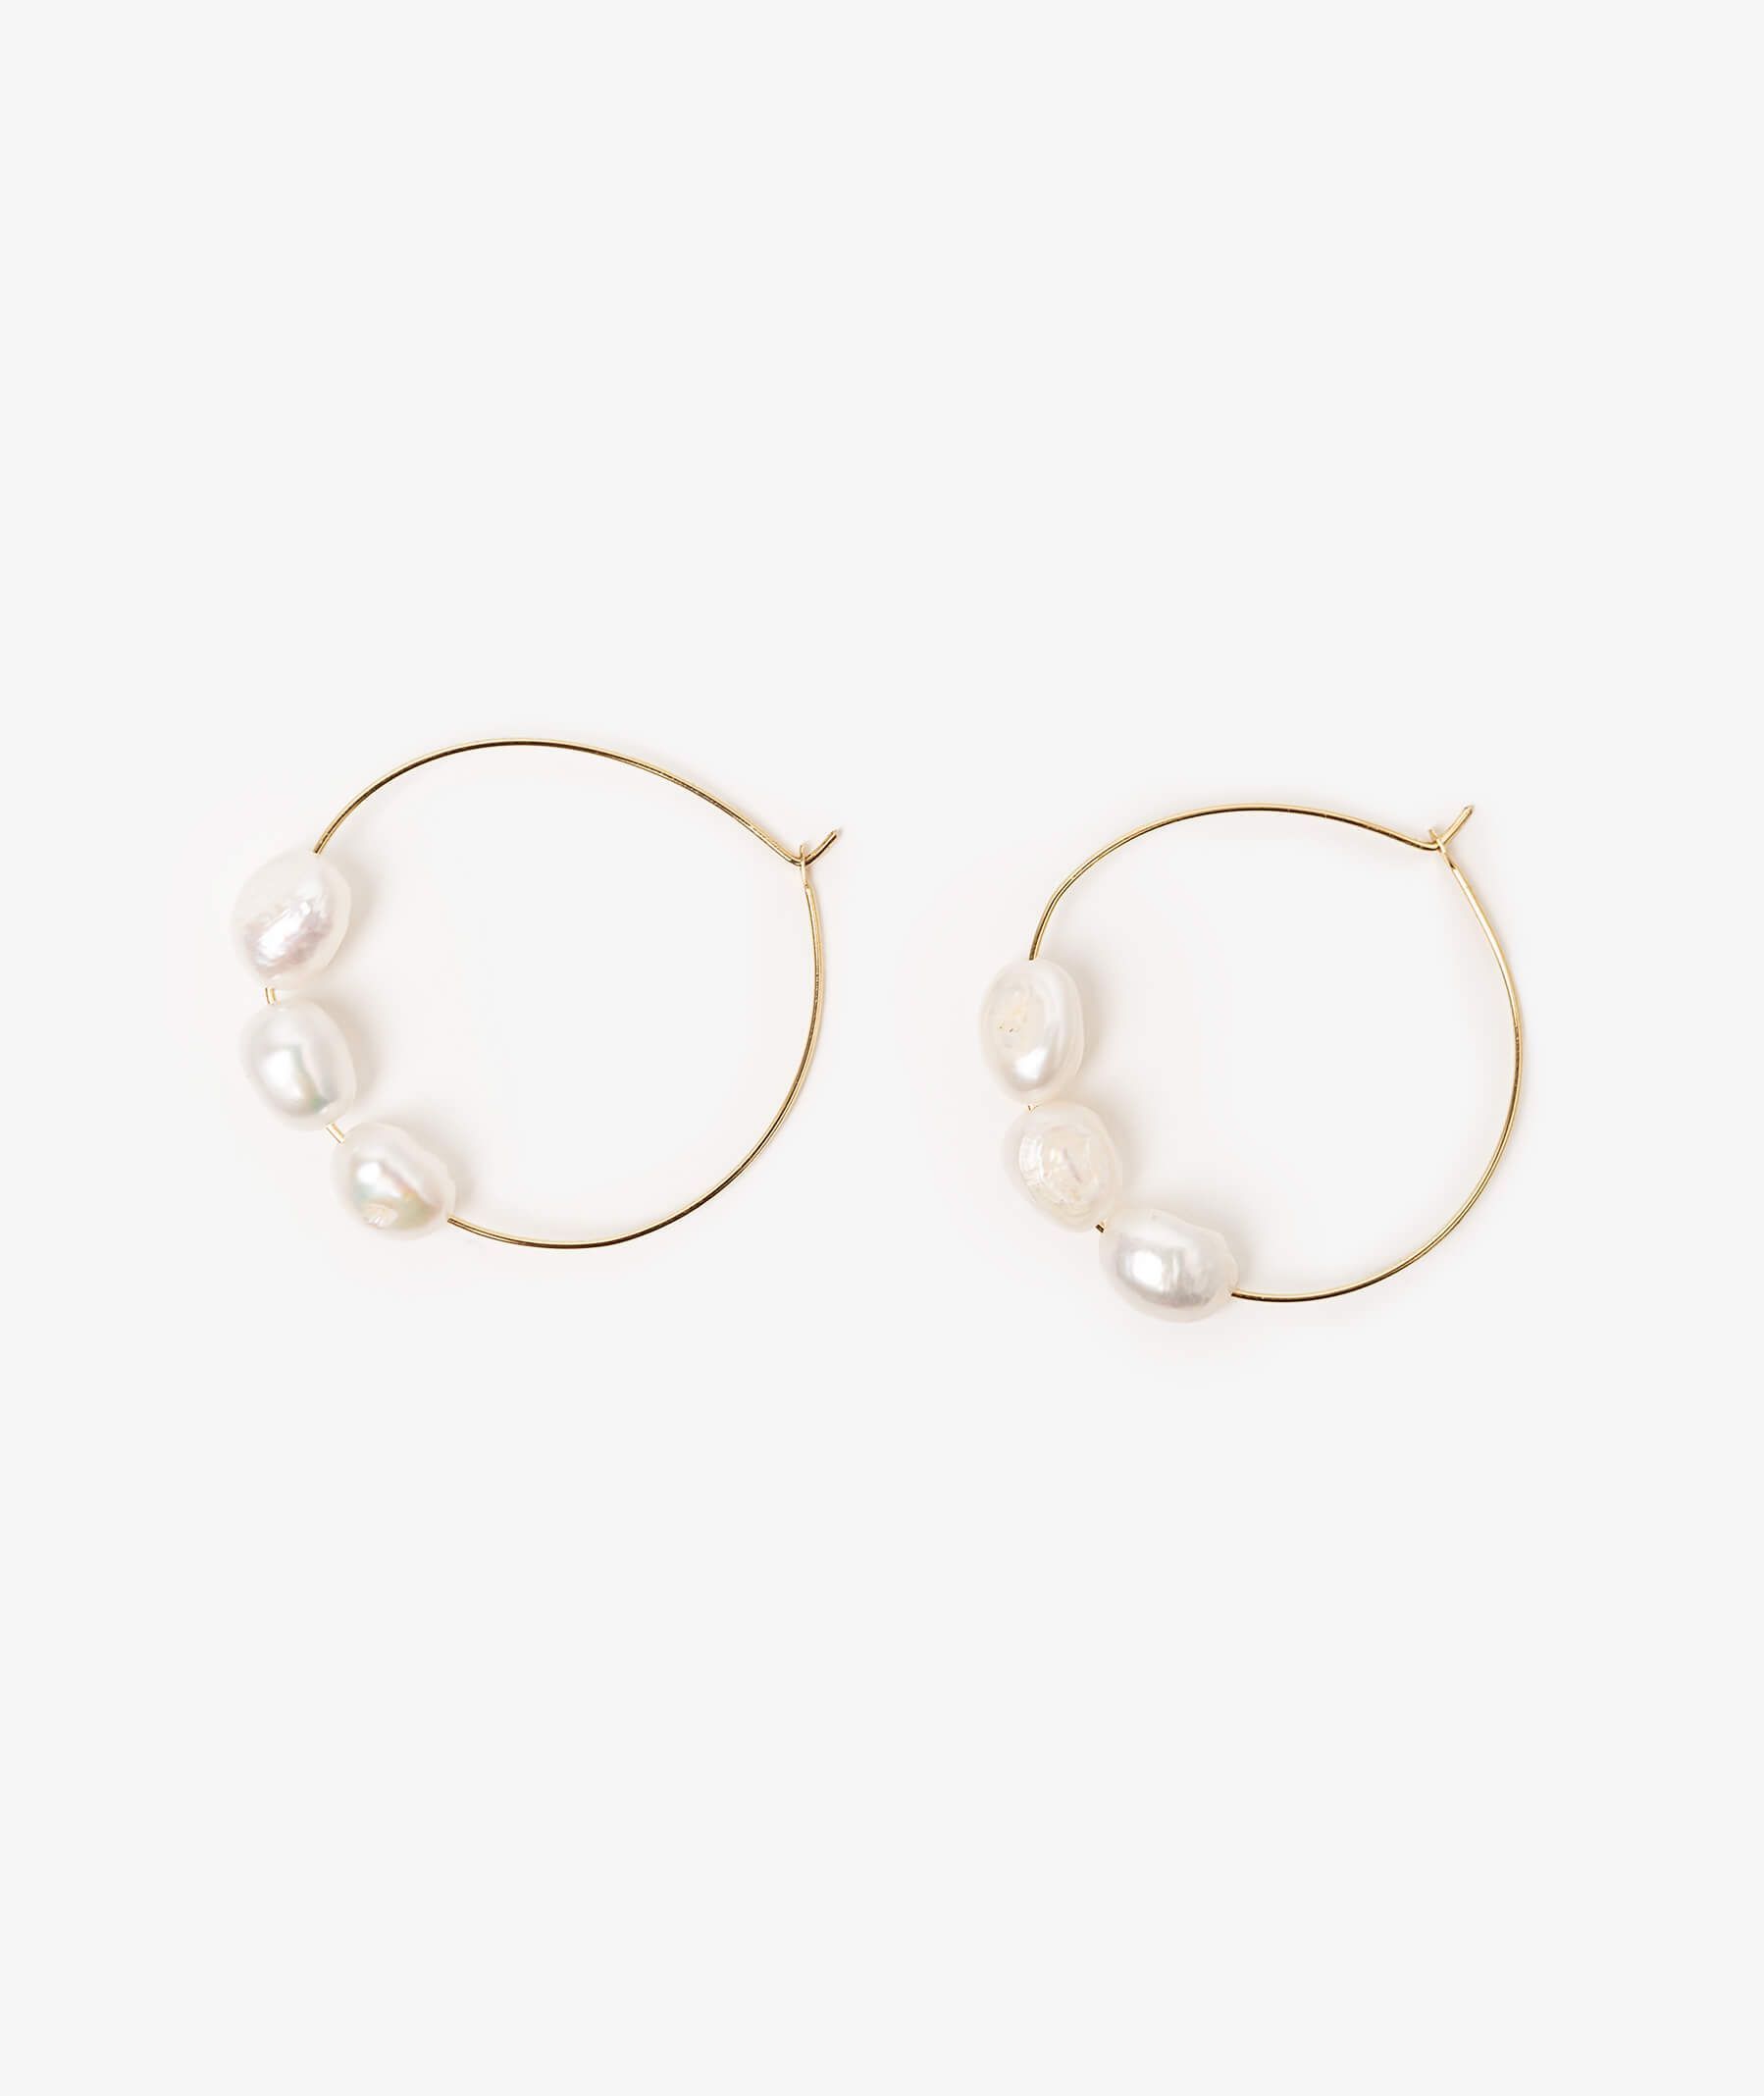 Product Image for Vega Pearl Earrings, Gold Plated Brass